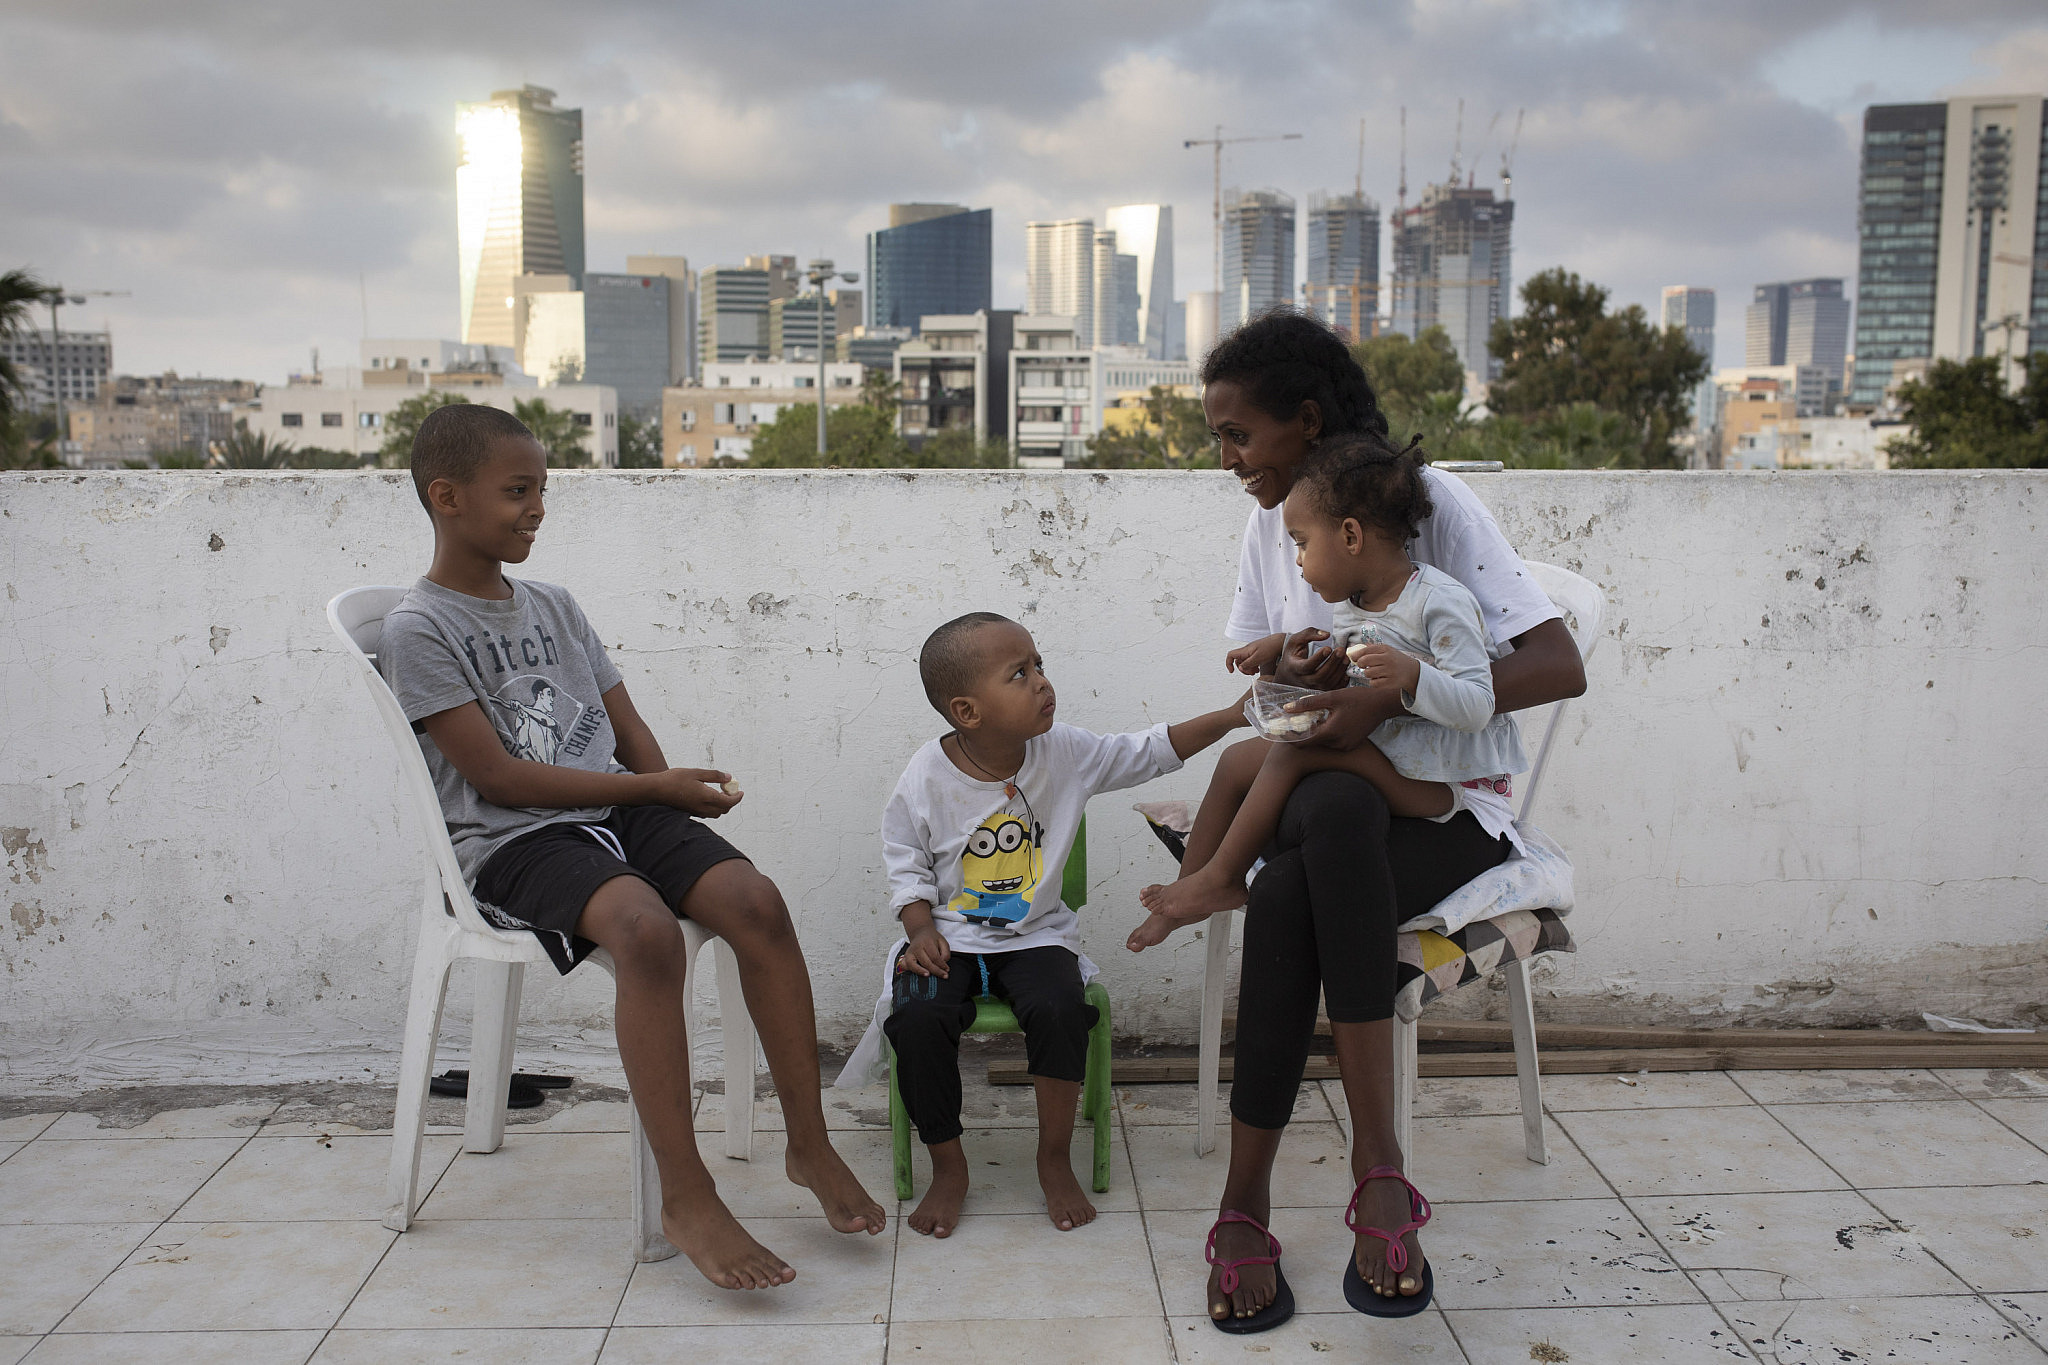 Niatt (29), a single mother, and her children Yafa (9), Osher (4) and Morel (2). They have been in the country for 13 years. The family lives in a two-room apartment in south Tel Aviv. Before the crisis started, Niatt was supposed to start working in a clothing store, but the store closed and she was left without work.